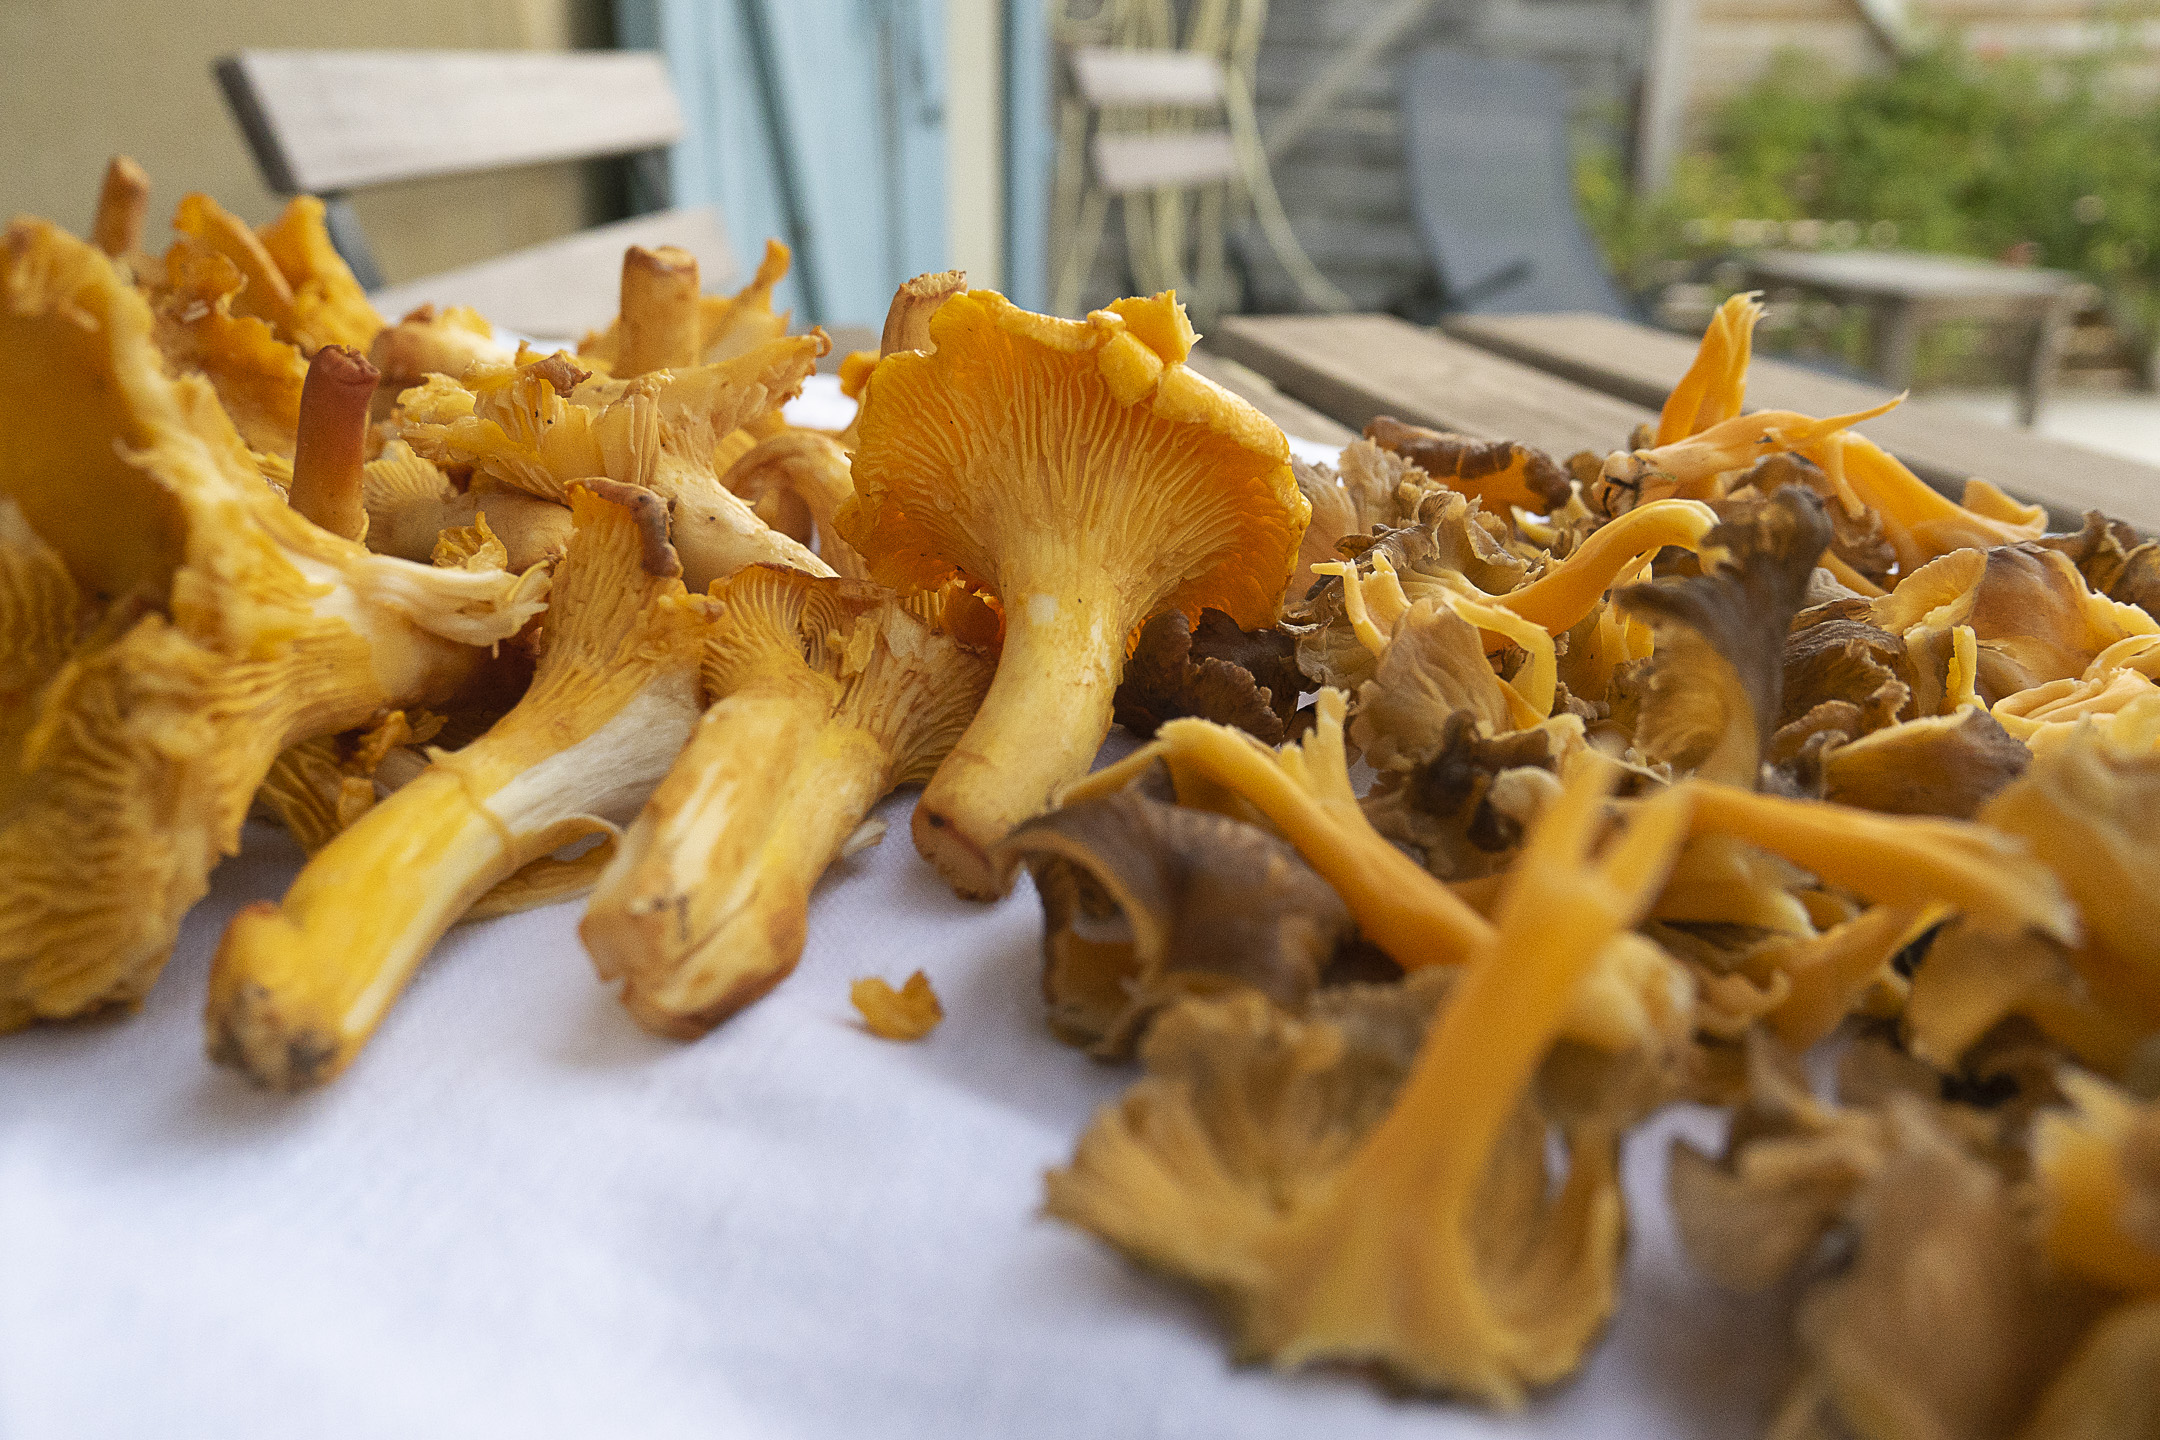 Chanterelles are easy to indulge in here.